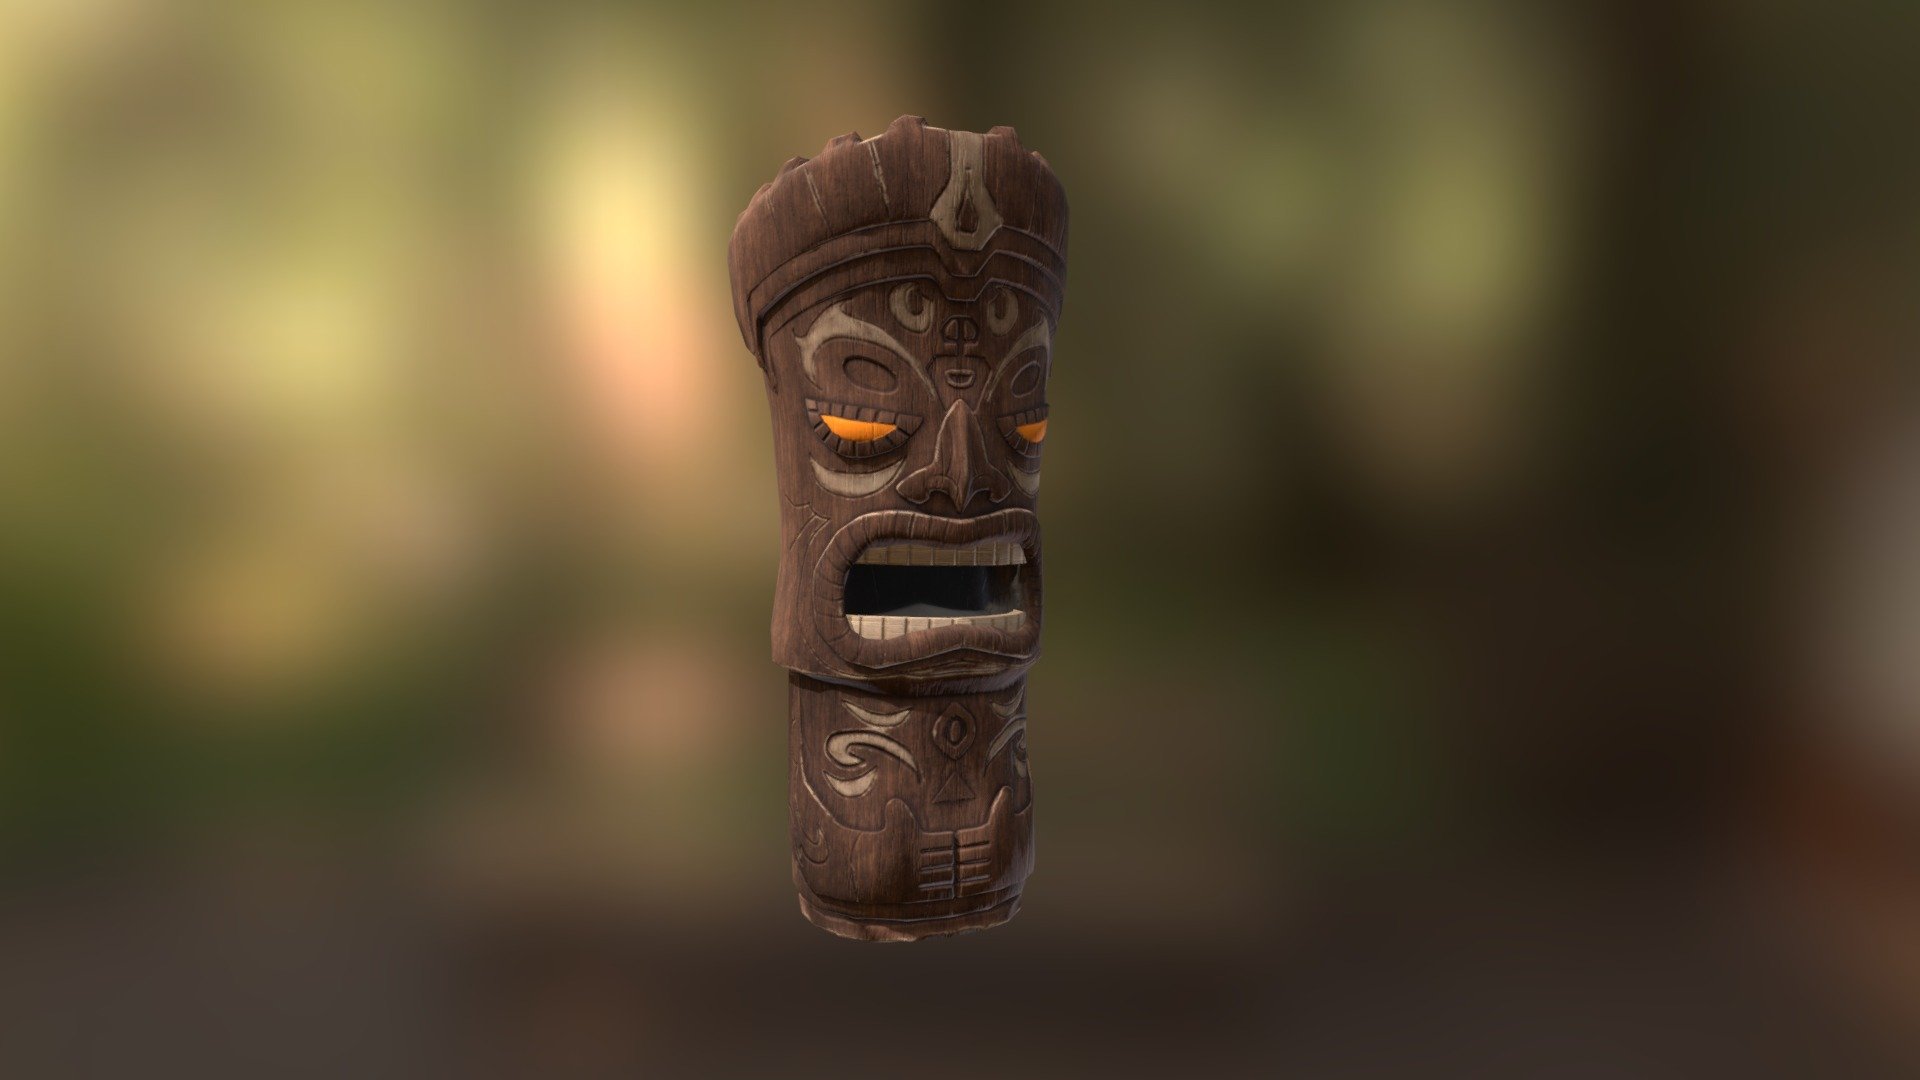 This Hawaiian Inspired Tiki statue will make a great prop for any island setting. This Tiki statue created using ZBrush, Maya, and Susbtance Painter. The asset is low-poly and game ready and also availabe in 2 other variations. They are available to purchase individually or as a set 3d model